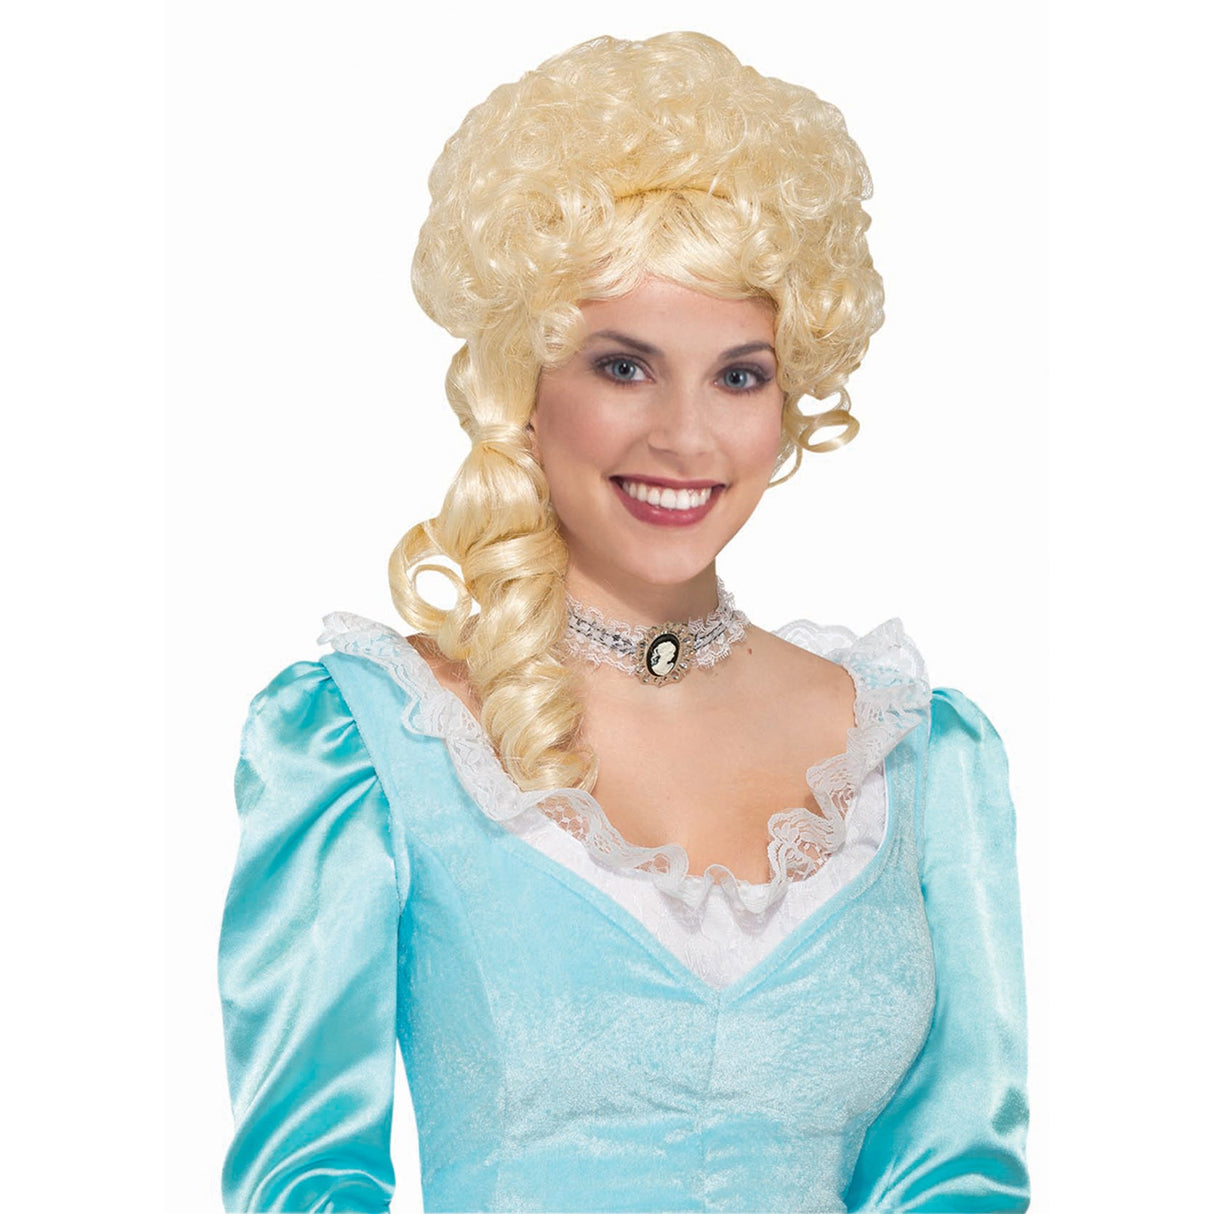 RUBIES II (Ruby Slipper Sales) Costume Accessories Blond Colonial Wig for Adults 721773780936